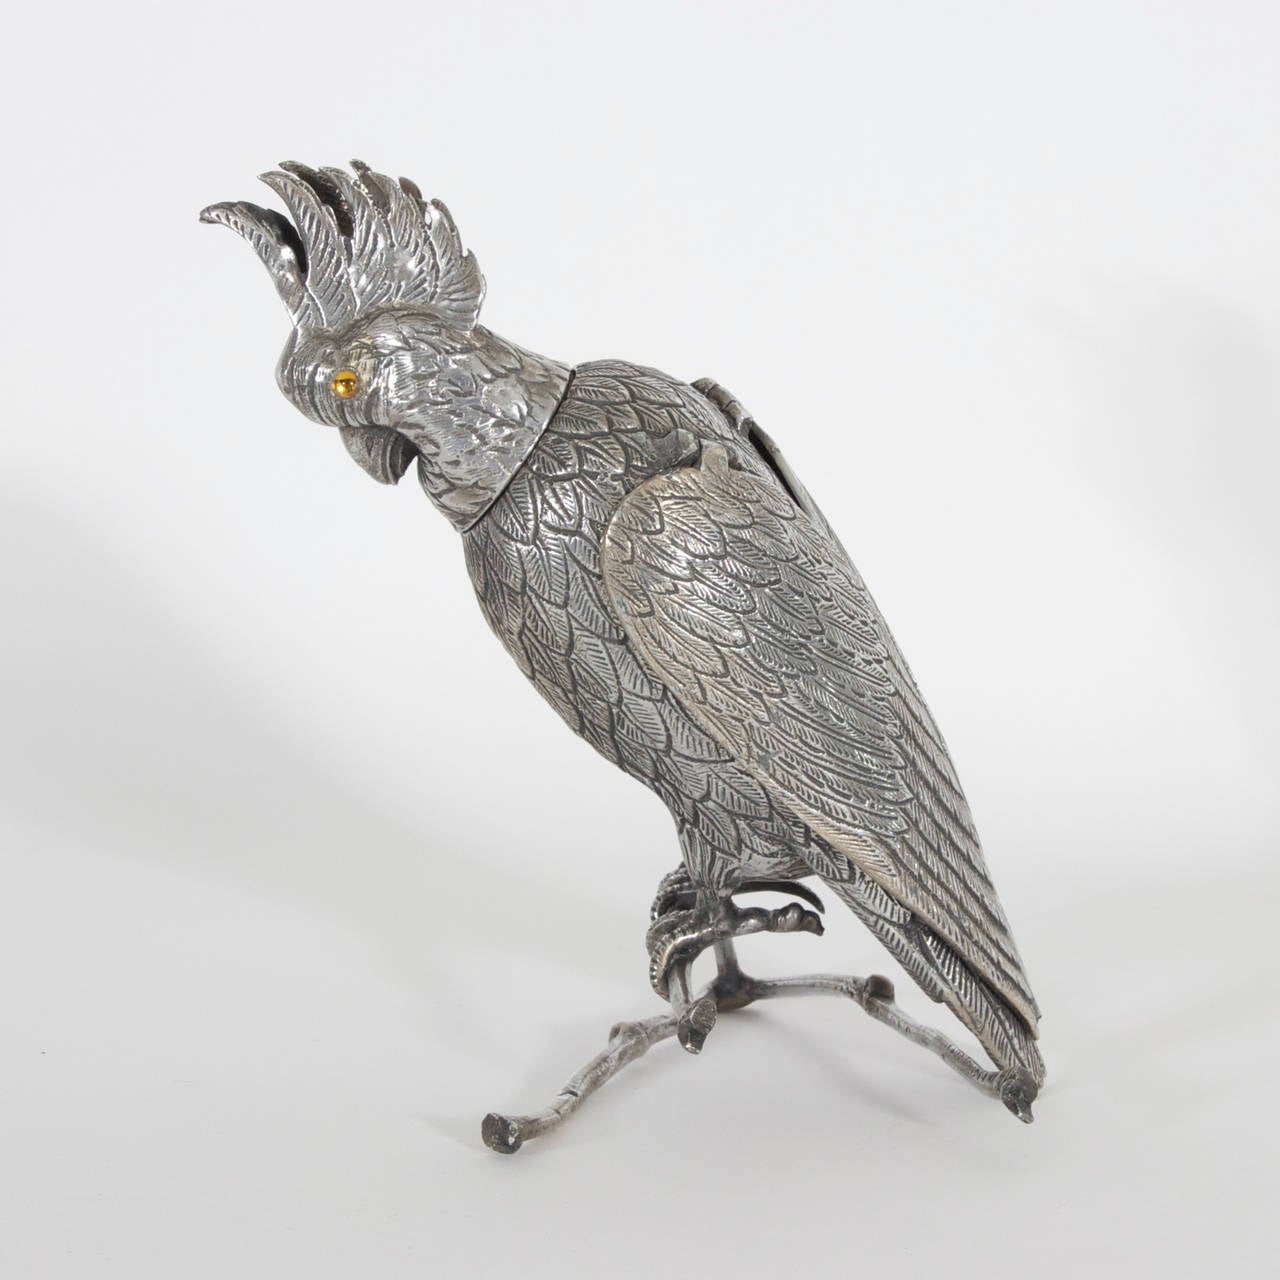 Silvered metal parrot with hinged wings, glass eyes and removable head for secret storage.  An intriguing object of interest with history we can only guess at. Beautiful to the eye, and practical for use as a box or container.

